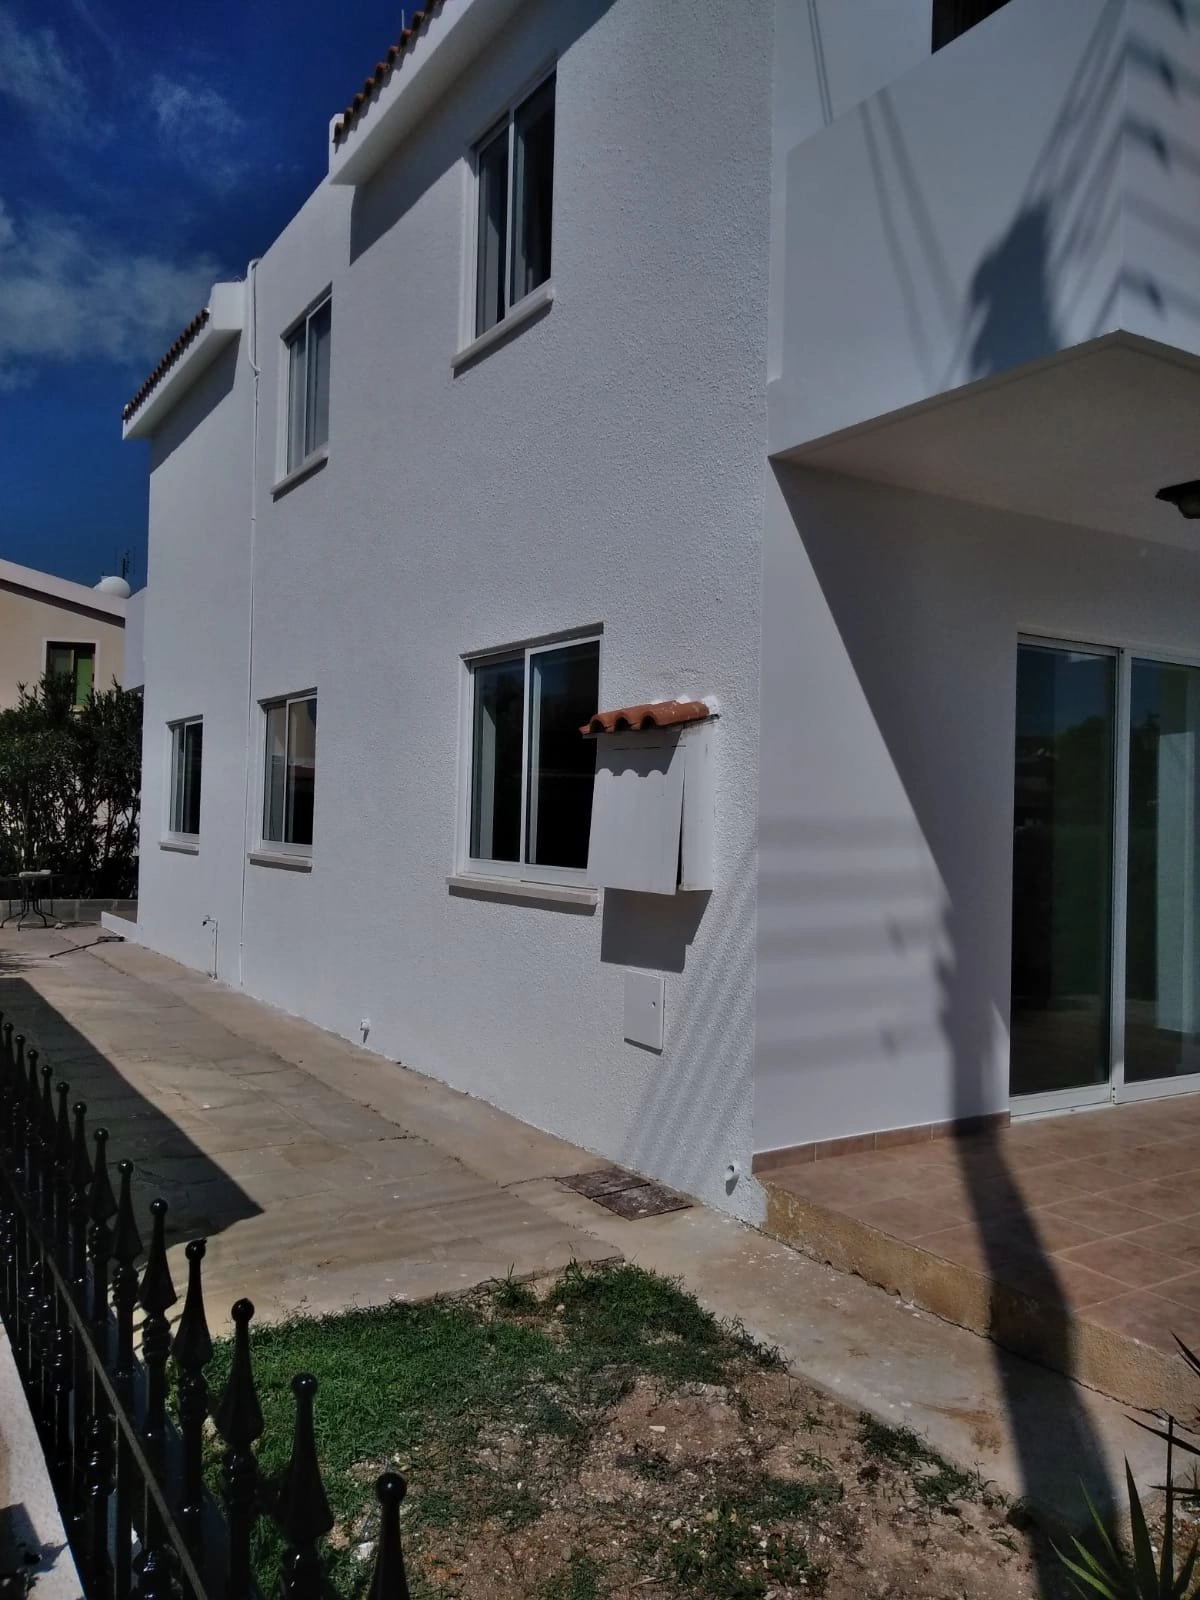 3 Bedroom House for Sale in Paphos – Anavargos